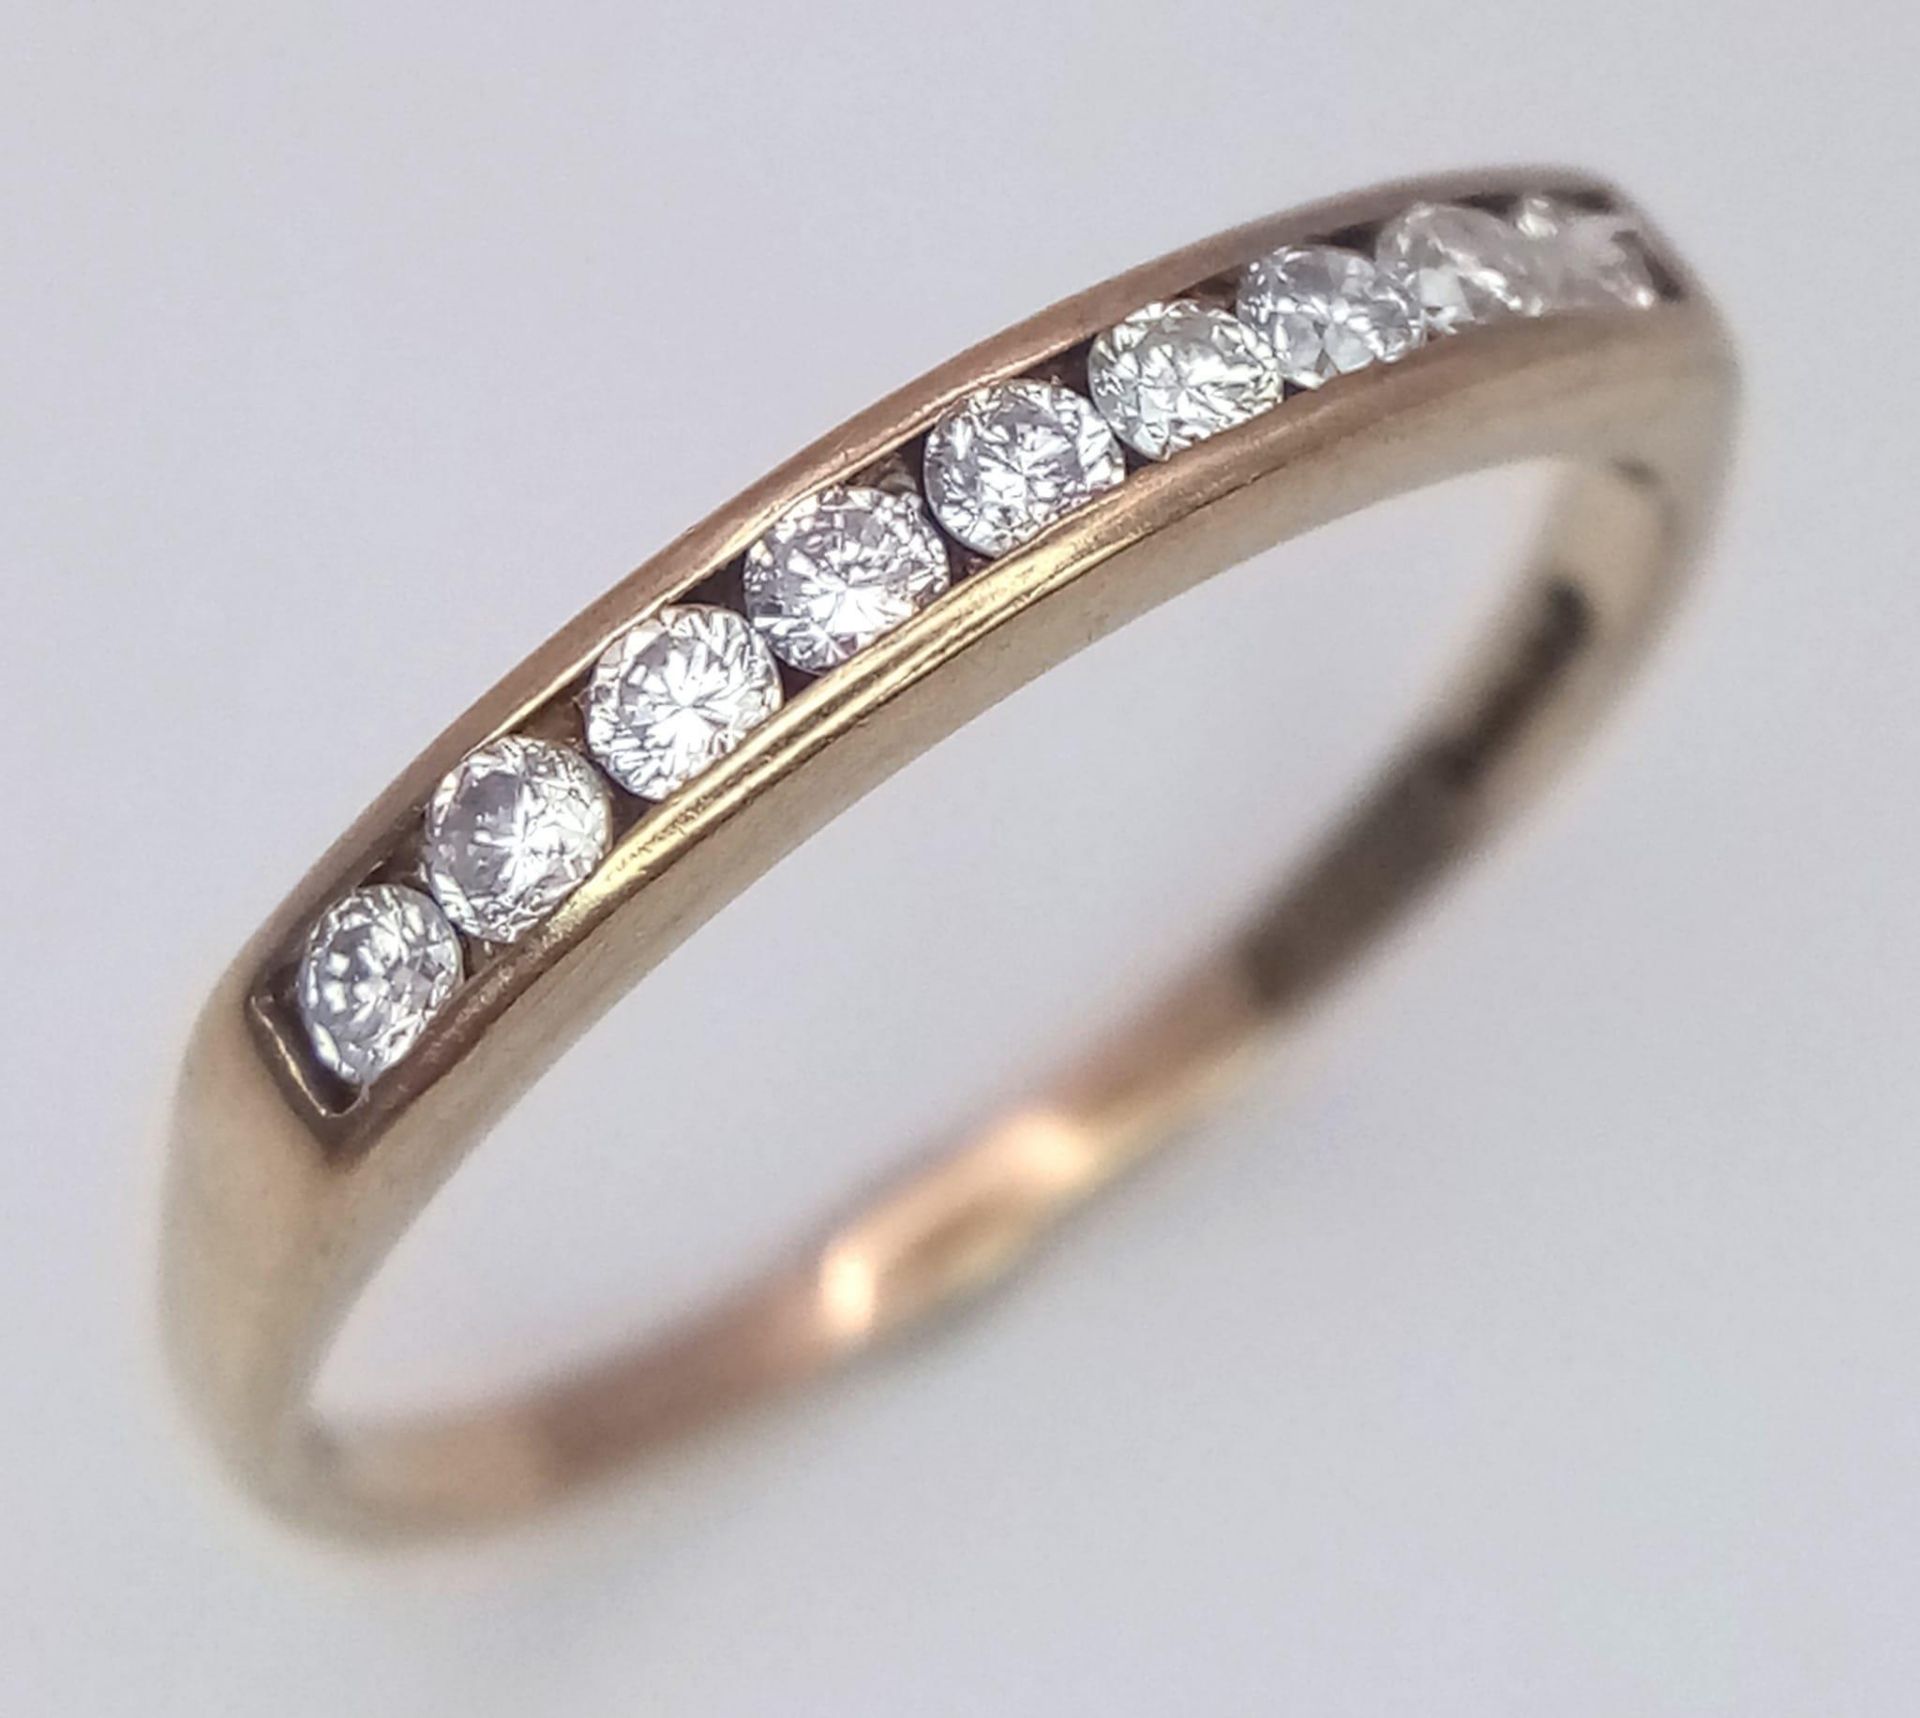 A 9K Yellow Gold Diamond Half Eternity Ring. 0.25ctw, Size P, 1.2g total weight. Ref: SC 7063 - Image 2 of 4